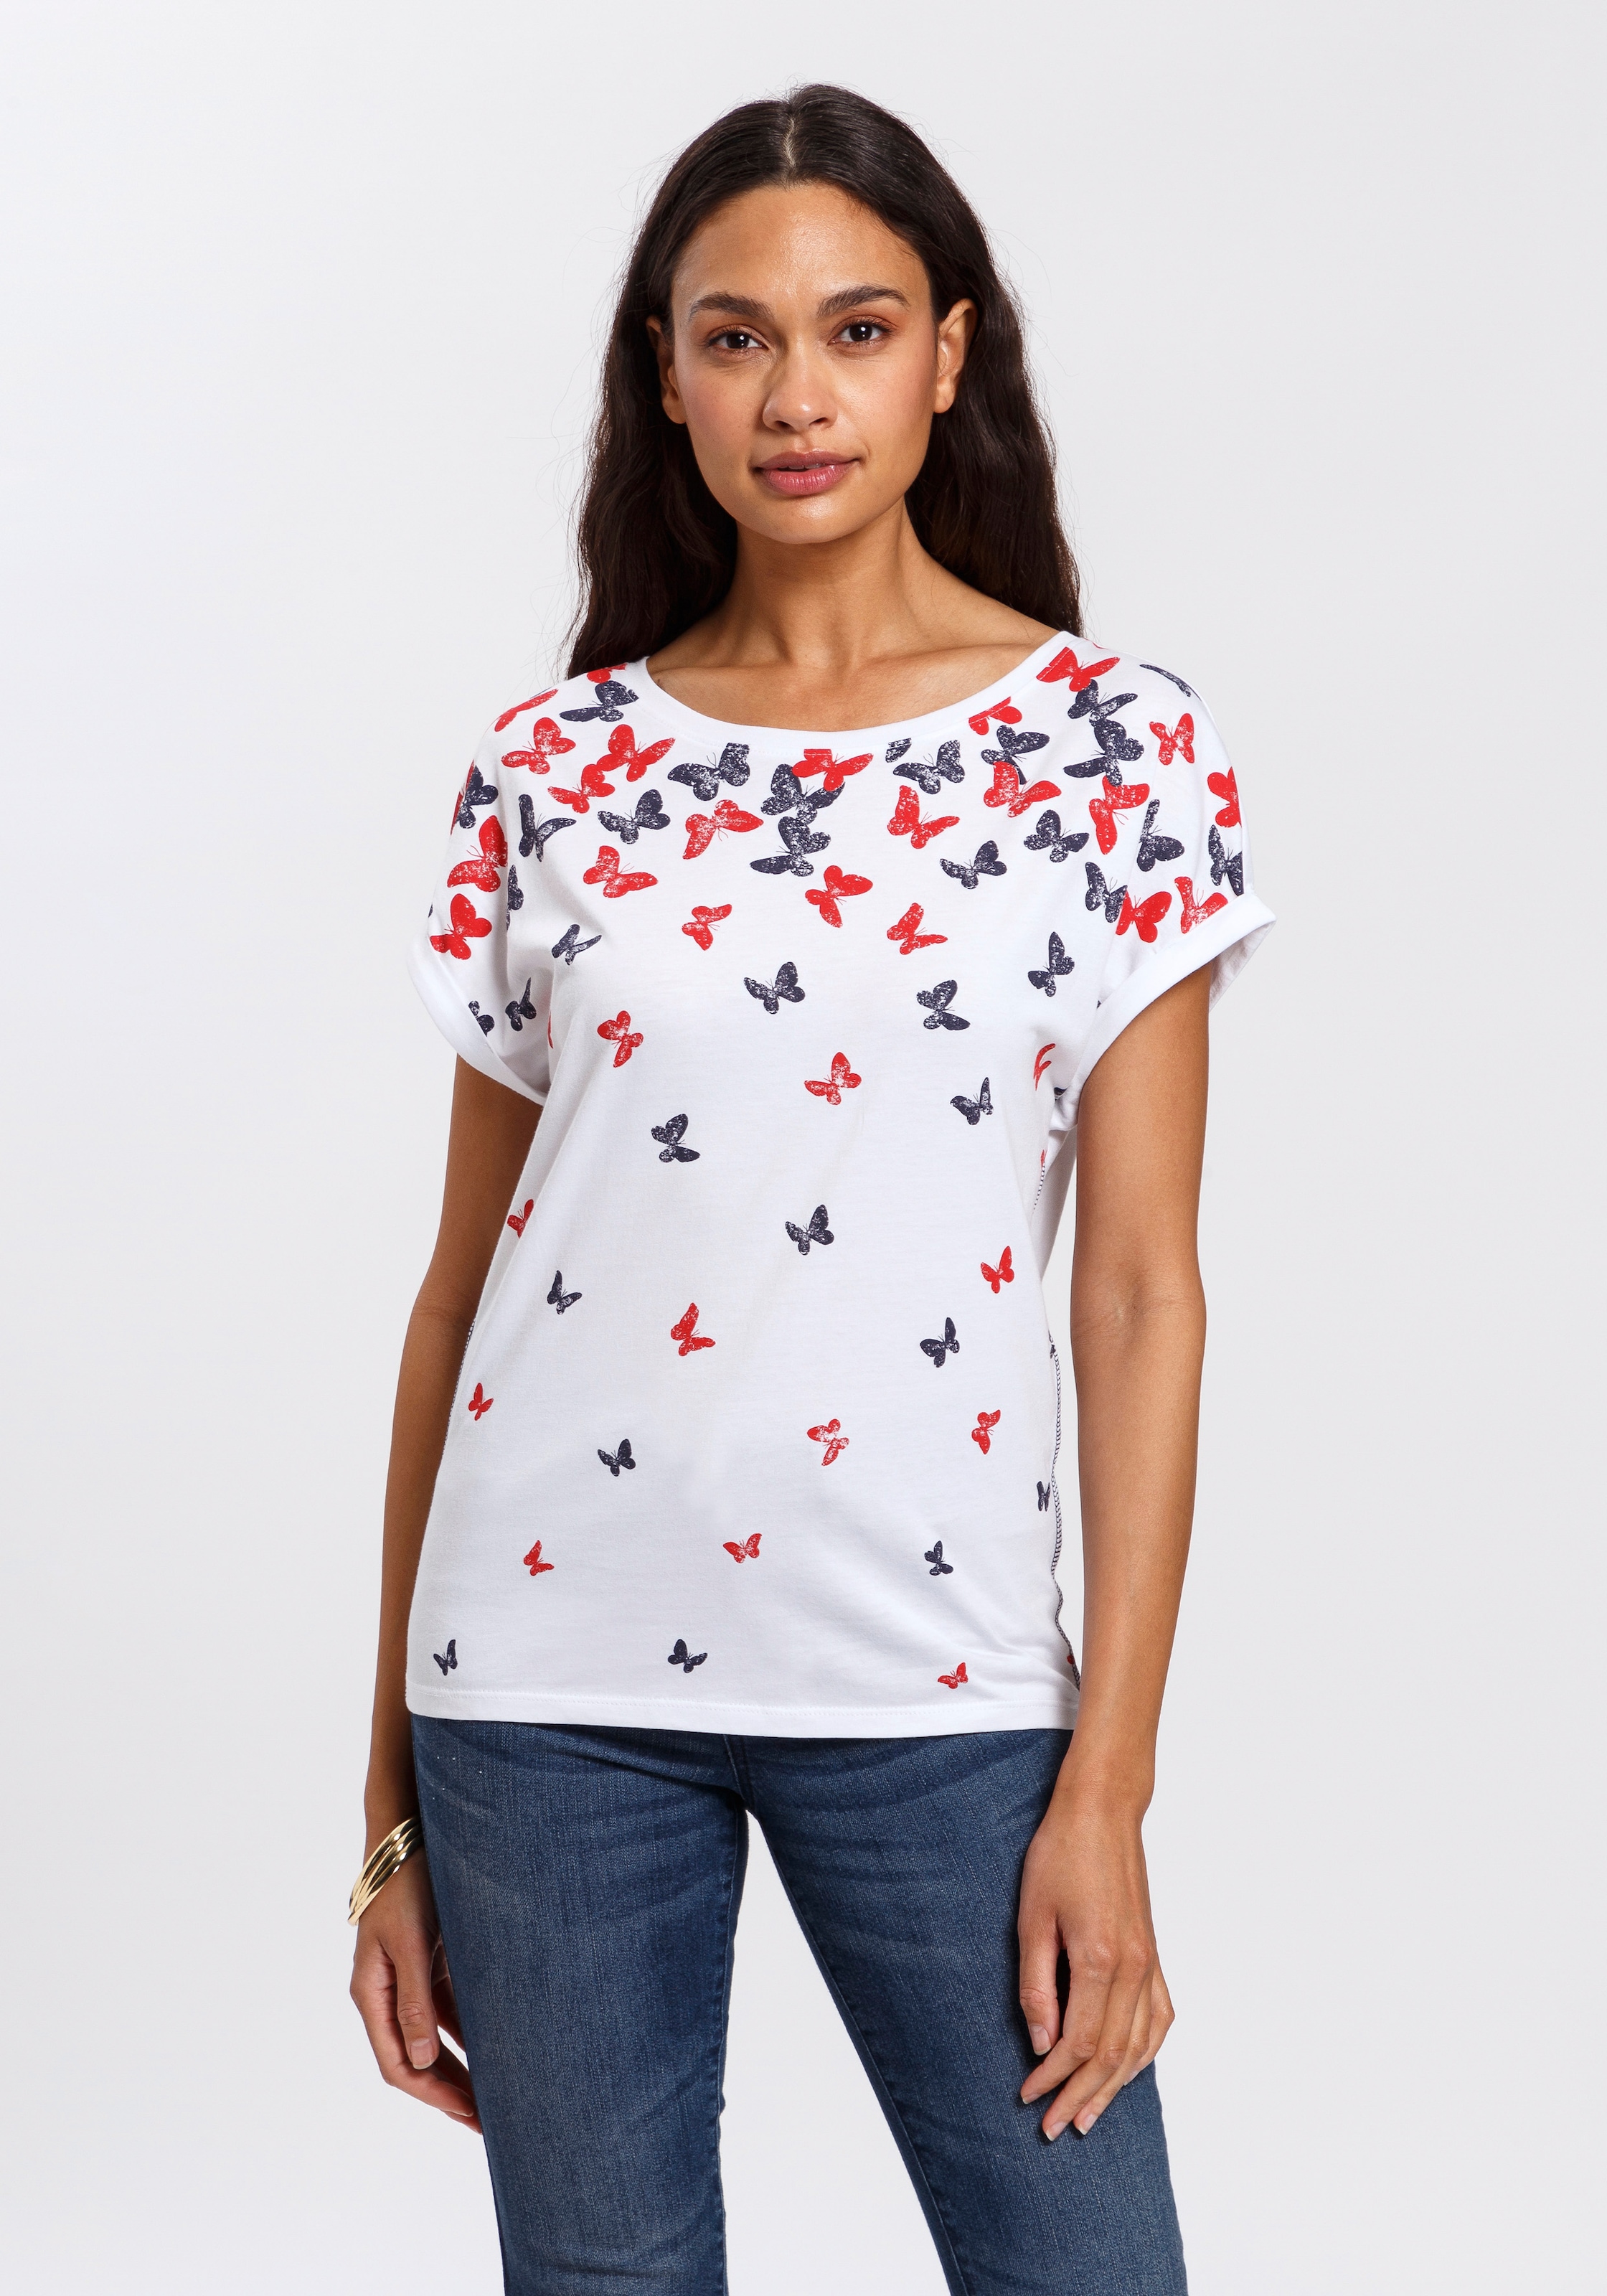 TOM TAILOR Polo Team All-Over ♕ bei niedlichem Print mit T-Shirt